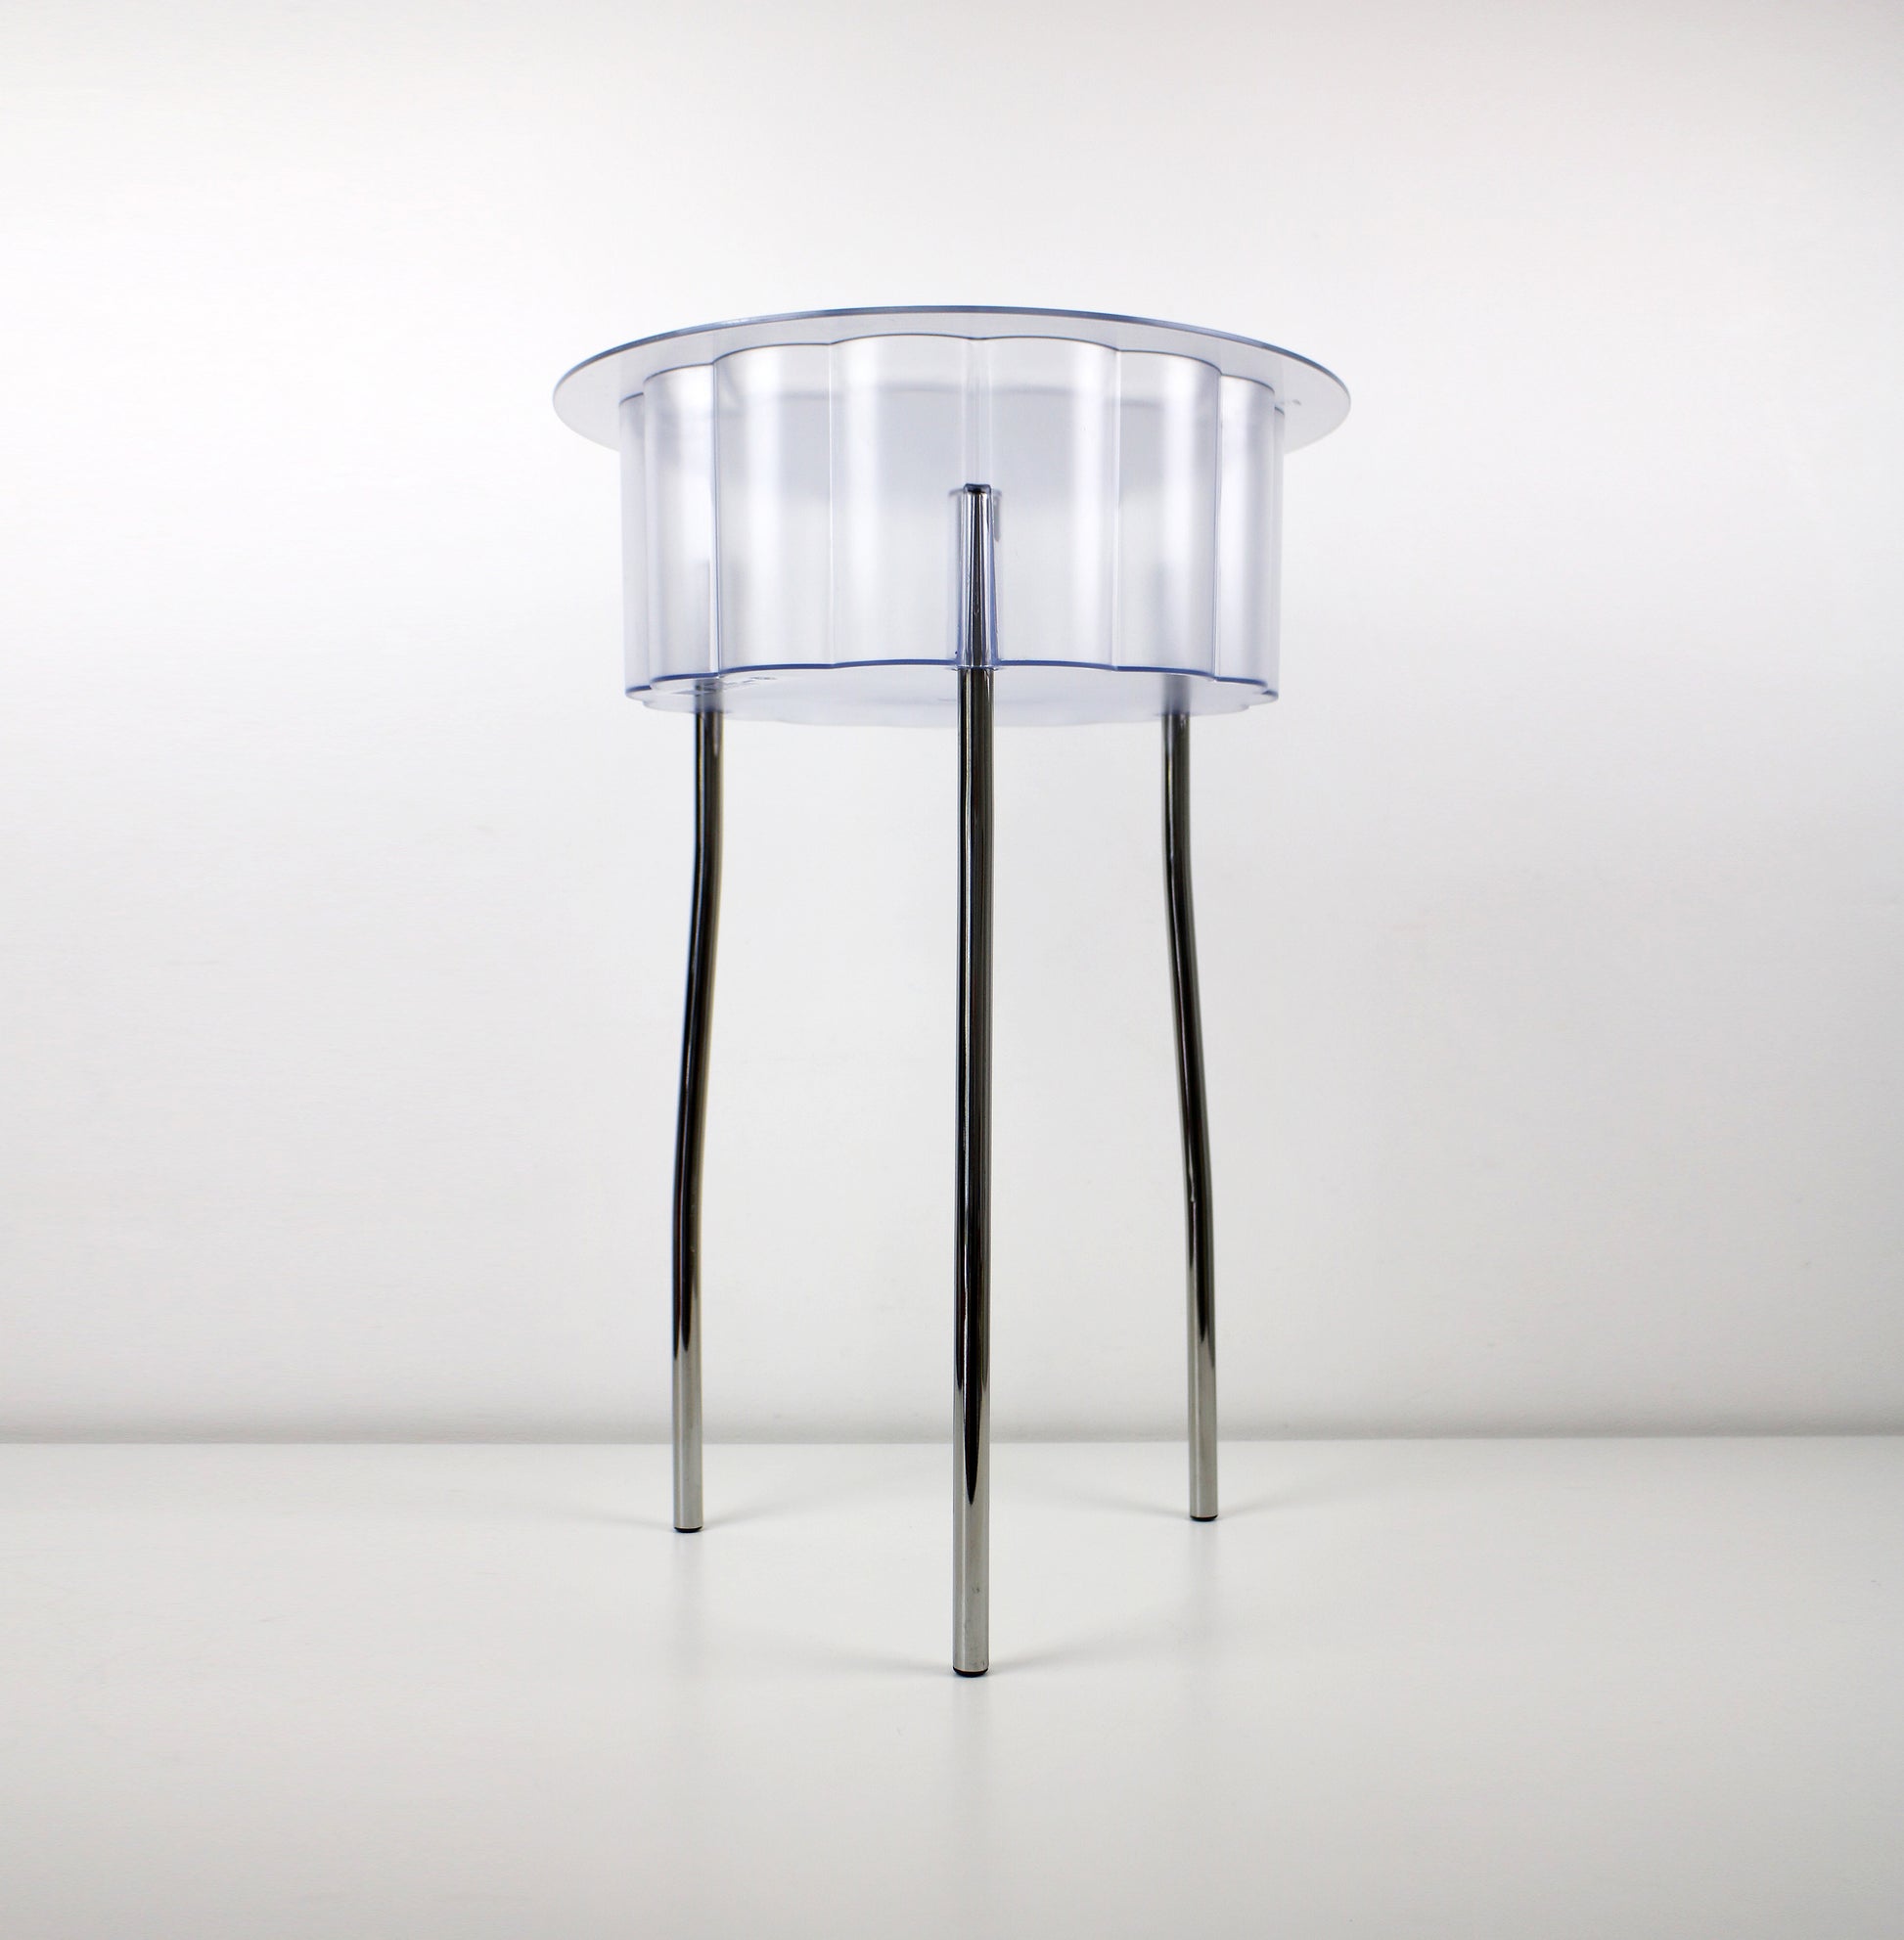 Ehlen Johansson for IKEA Hatten clear acrylic and metal side table with tray